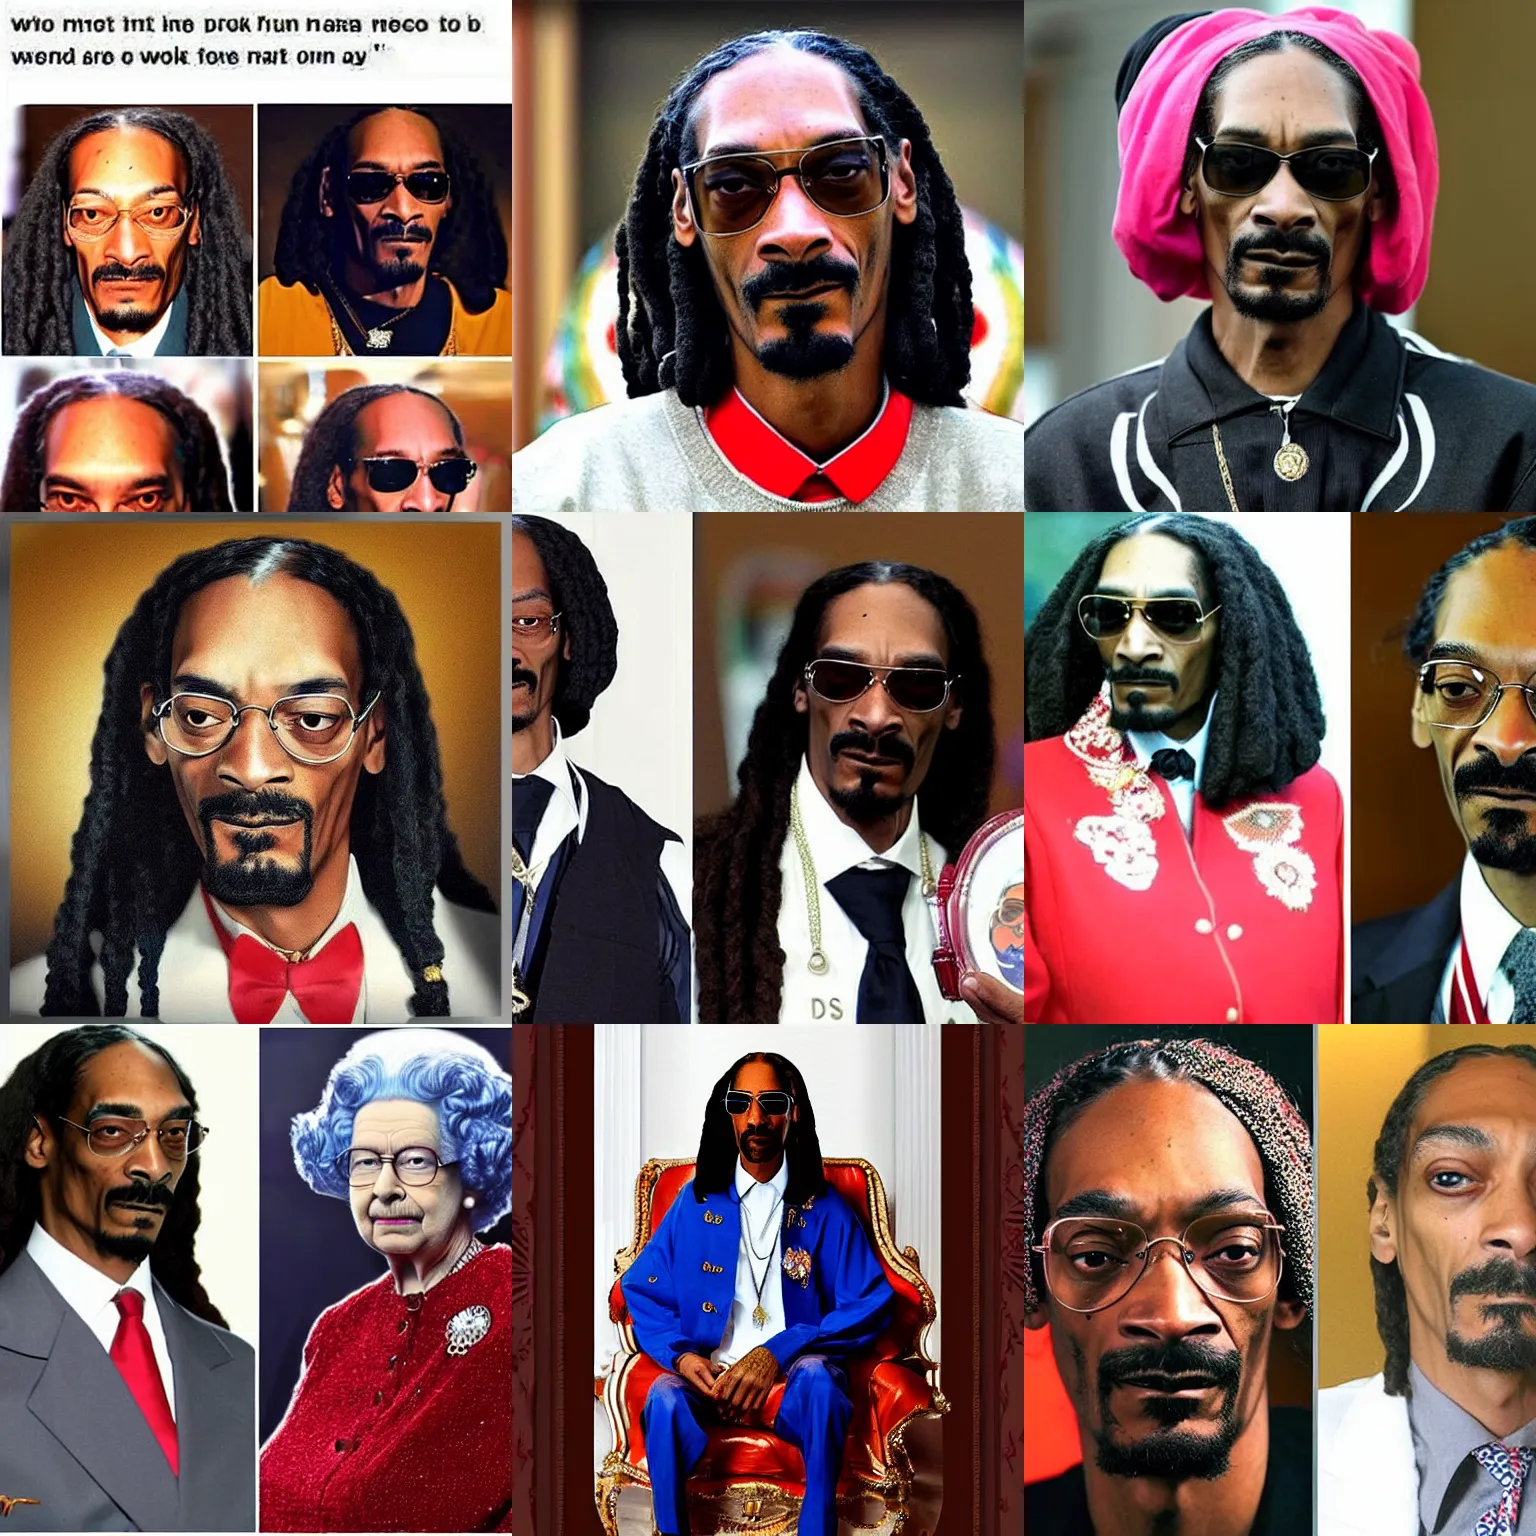 Prompt: a person who looks like a mix between snoop dogg and queen elizabeth